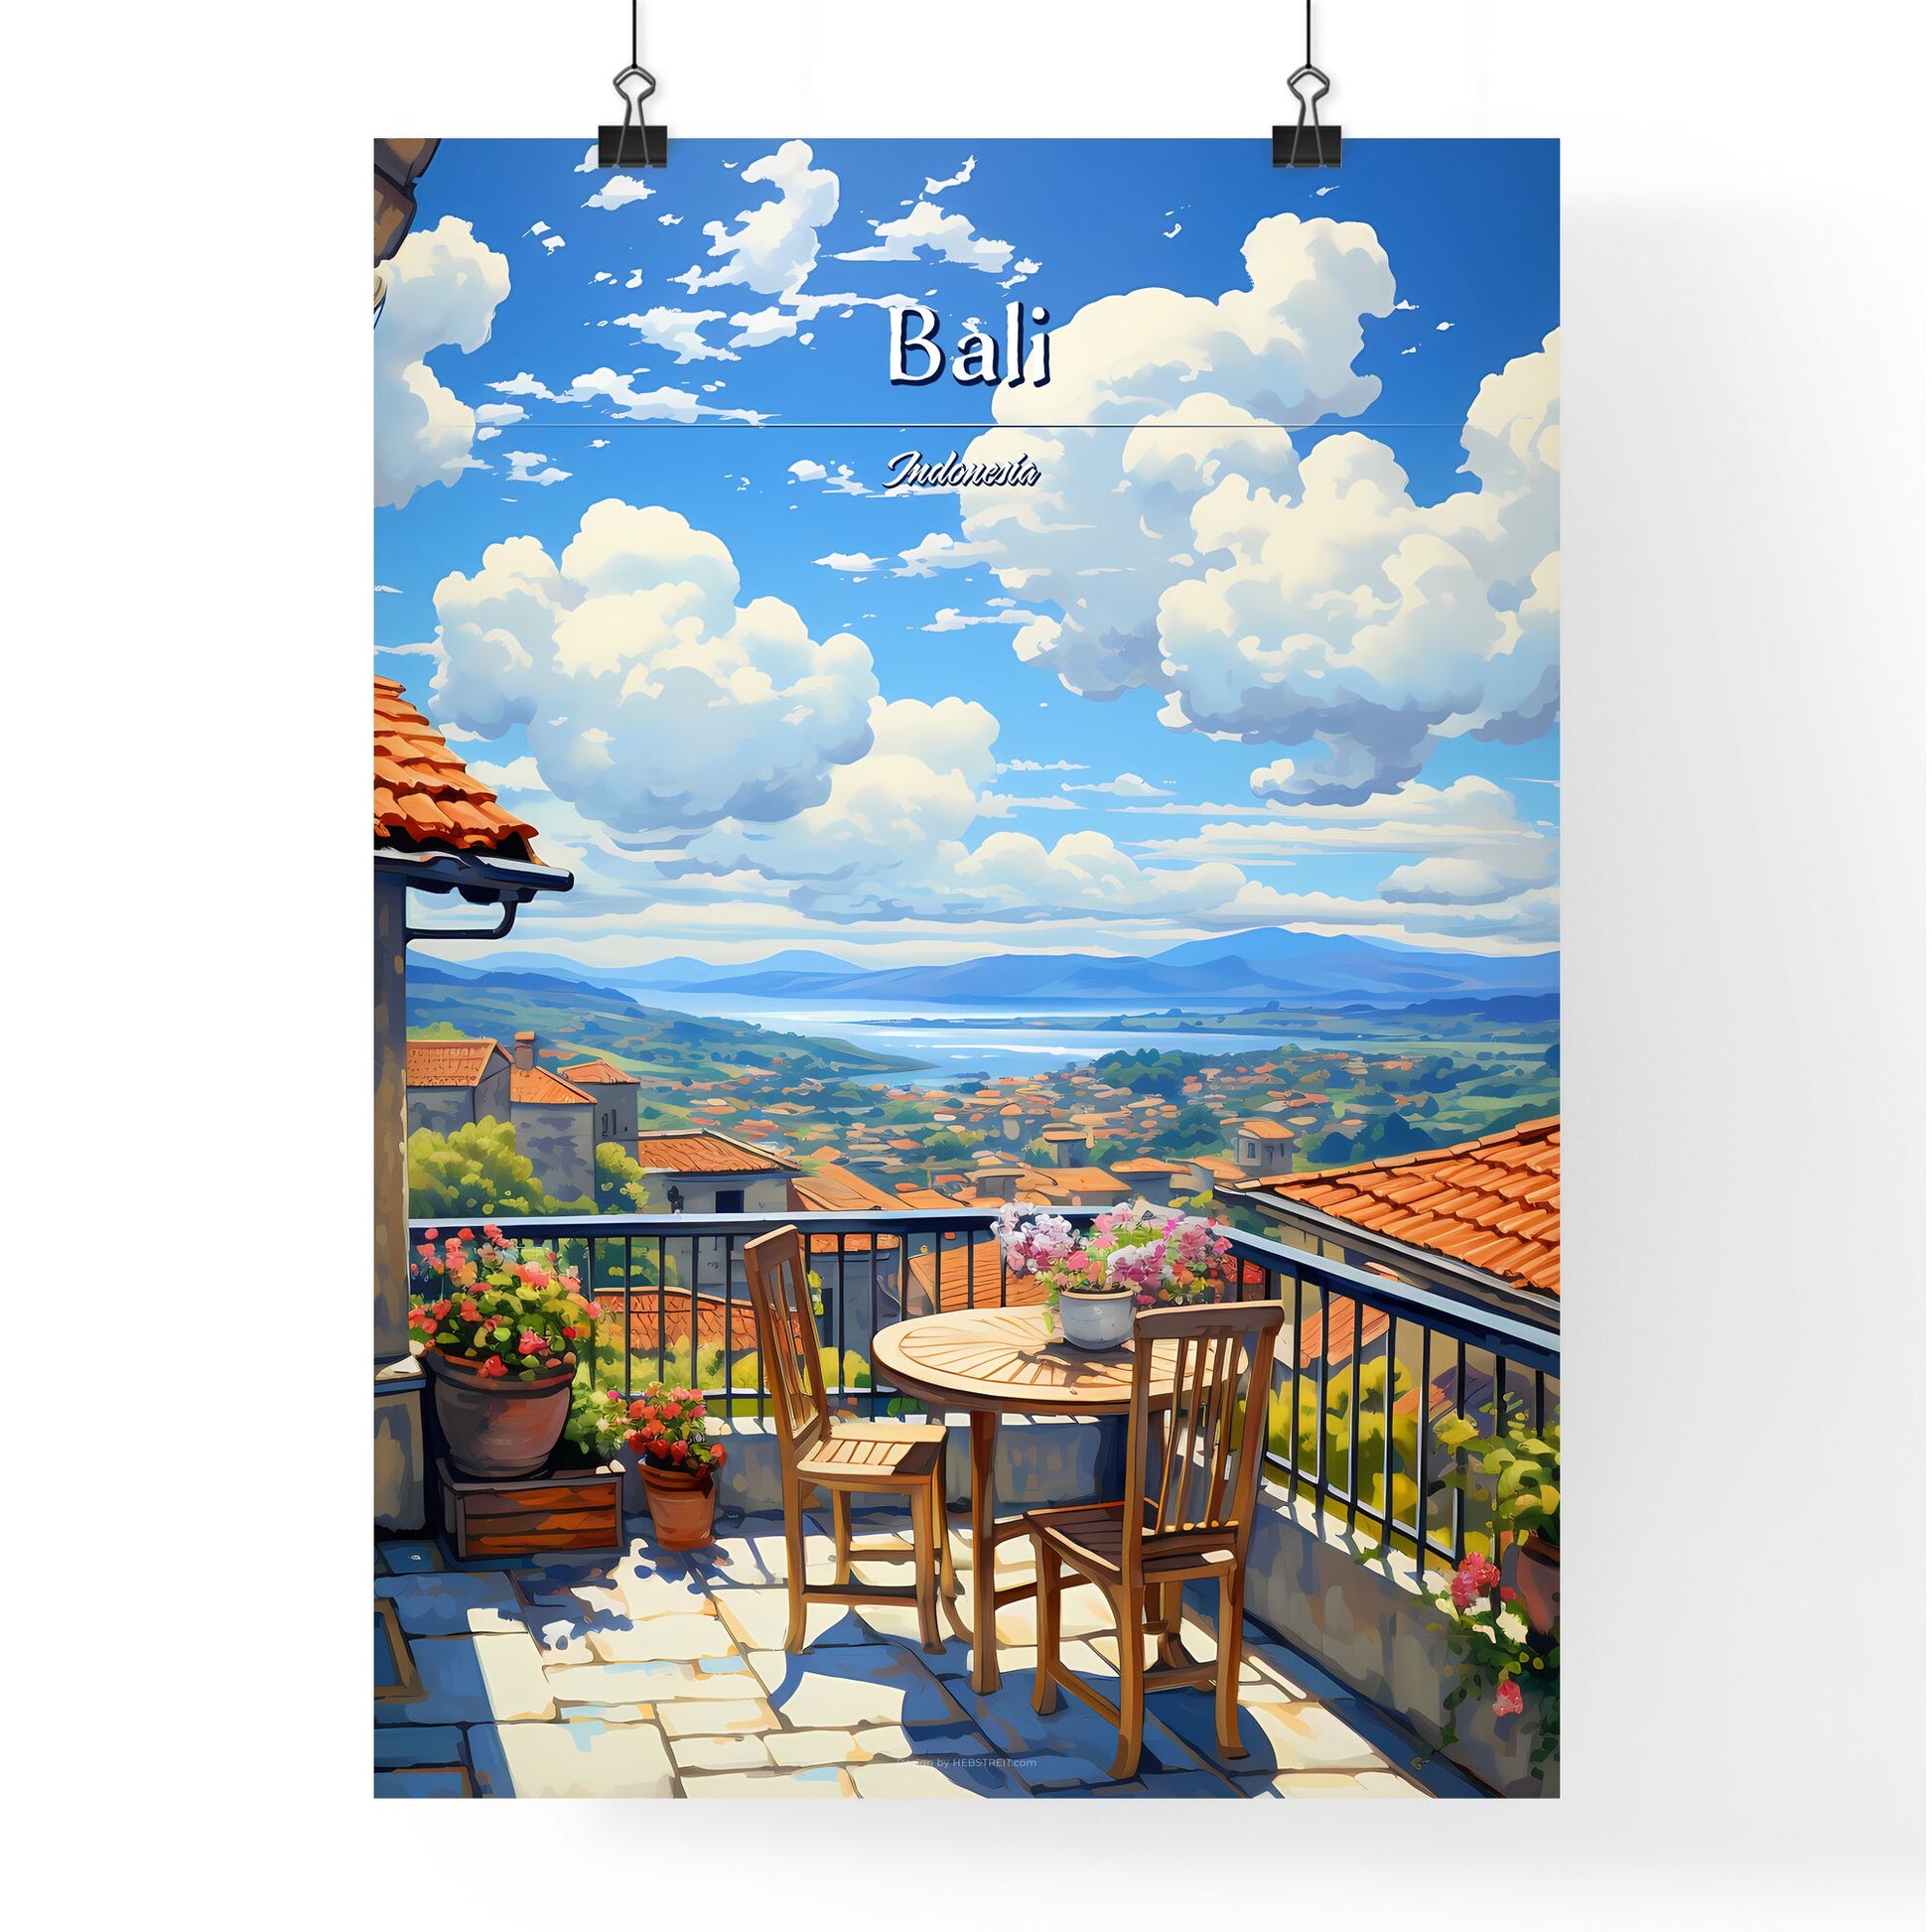 On the roofs of Bali, Indonesia - Art print of a table and chairs on a balcony overlooking a valley Default Title